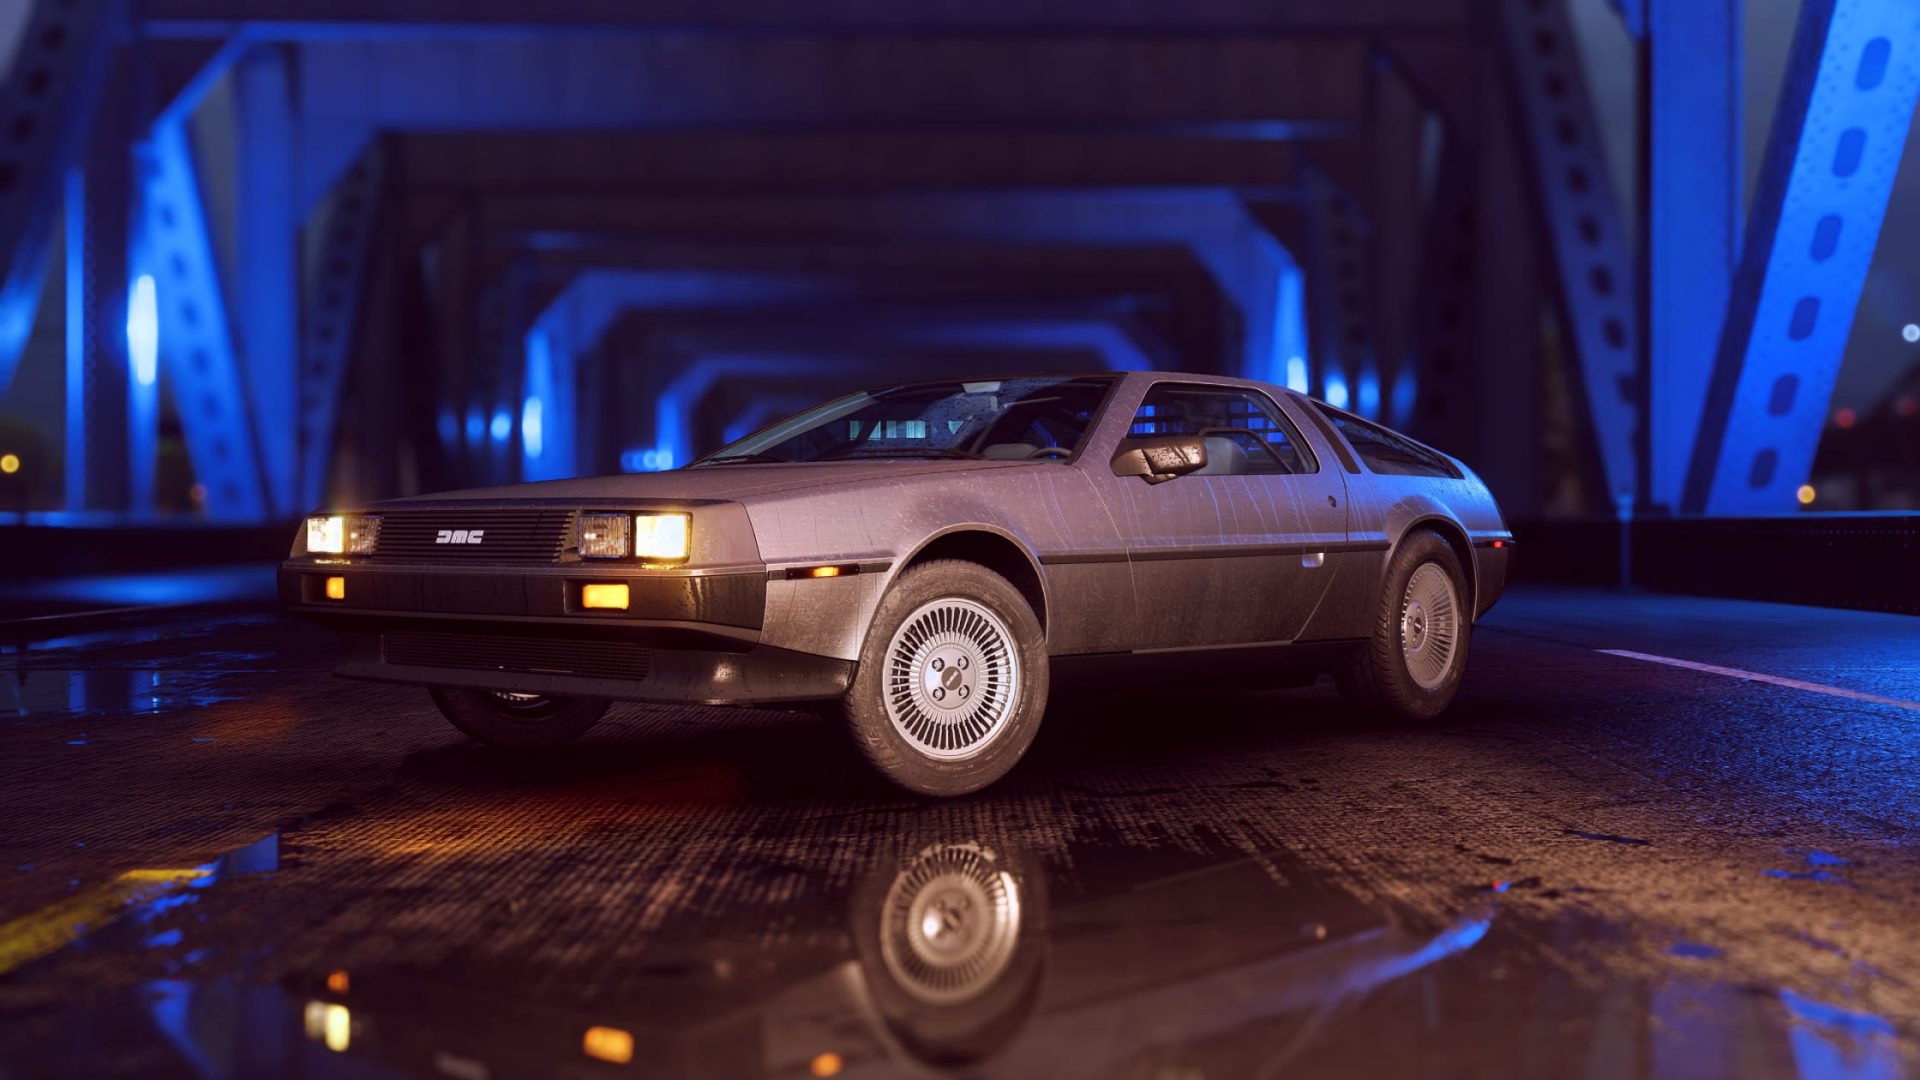 NFS - Need for Speed Unbound - DeLorean